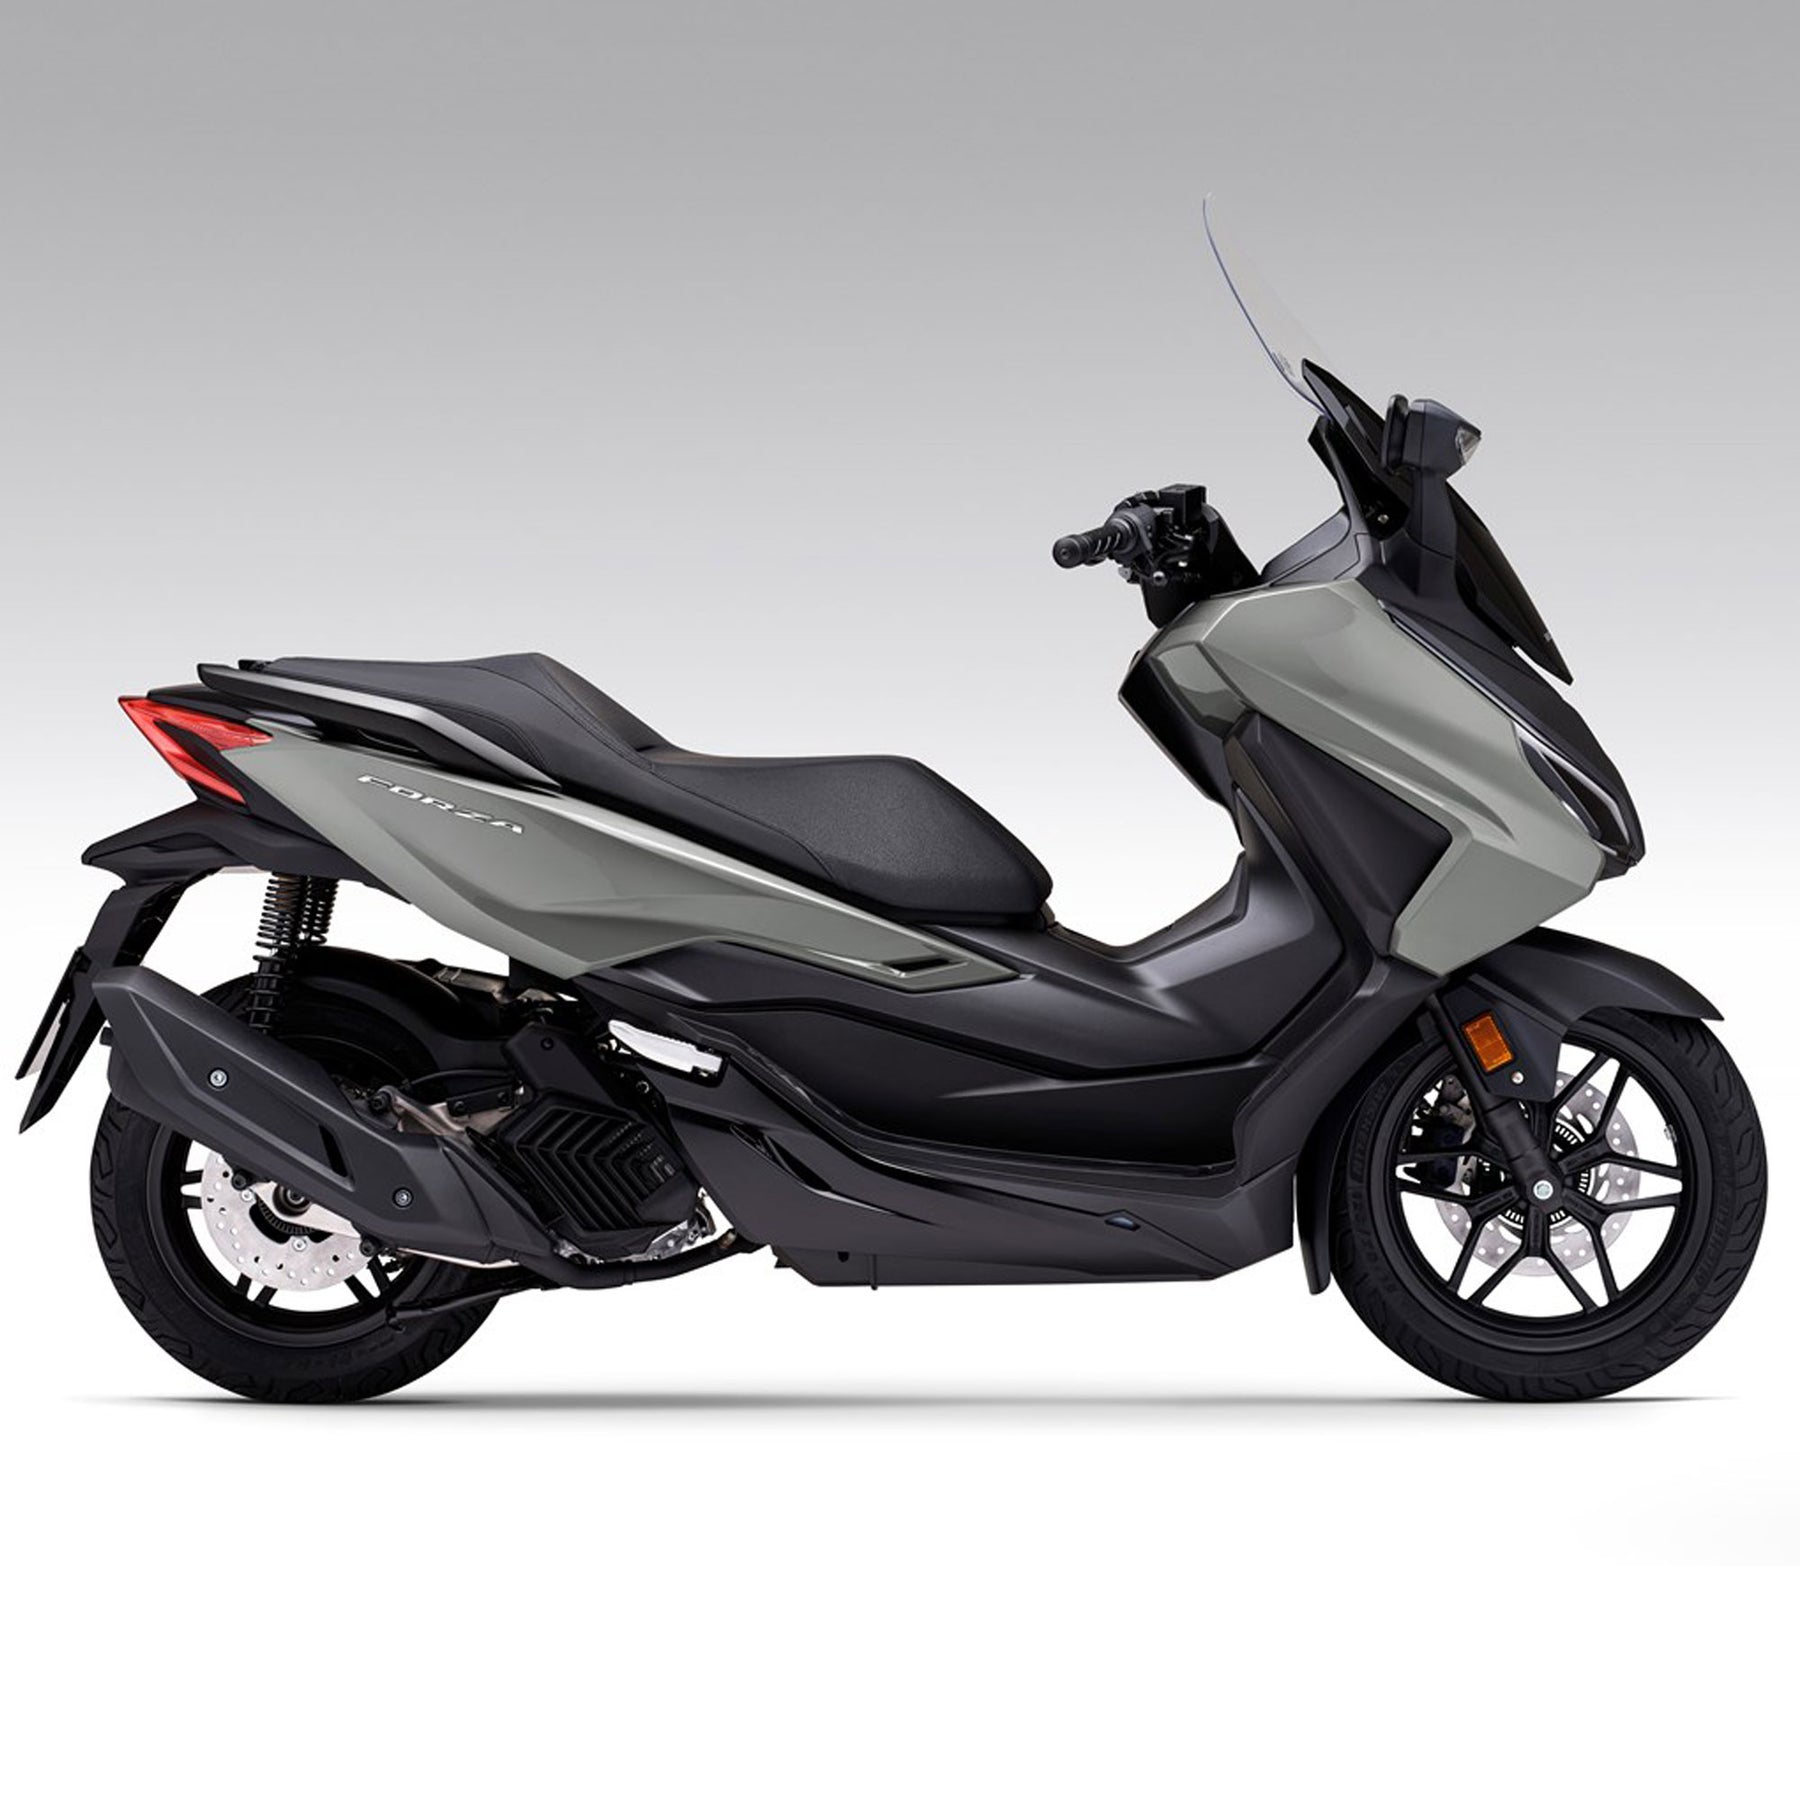 Scooters for Sale Bournemouth | Honda of Bournemouth | Forza 125